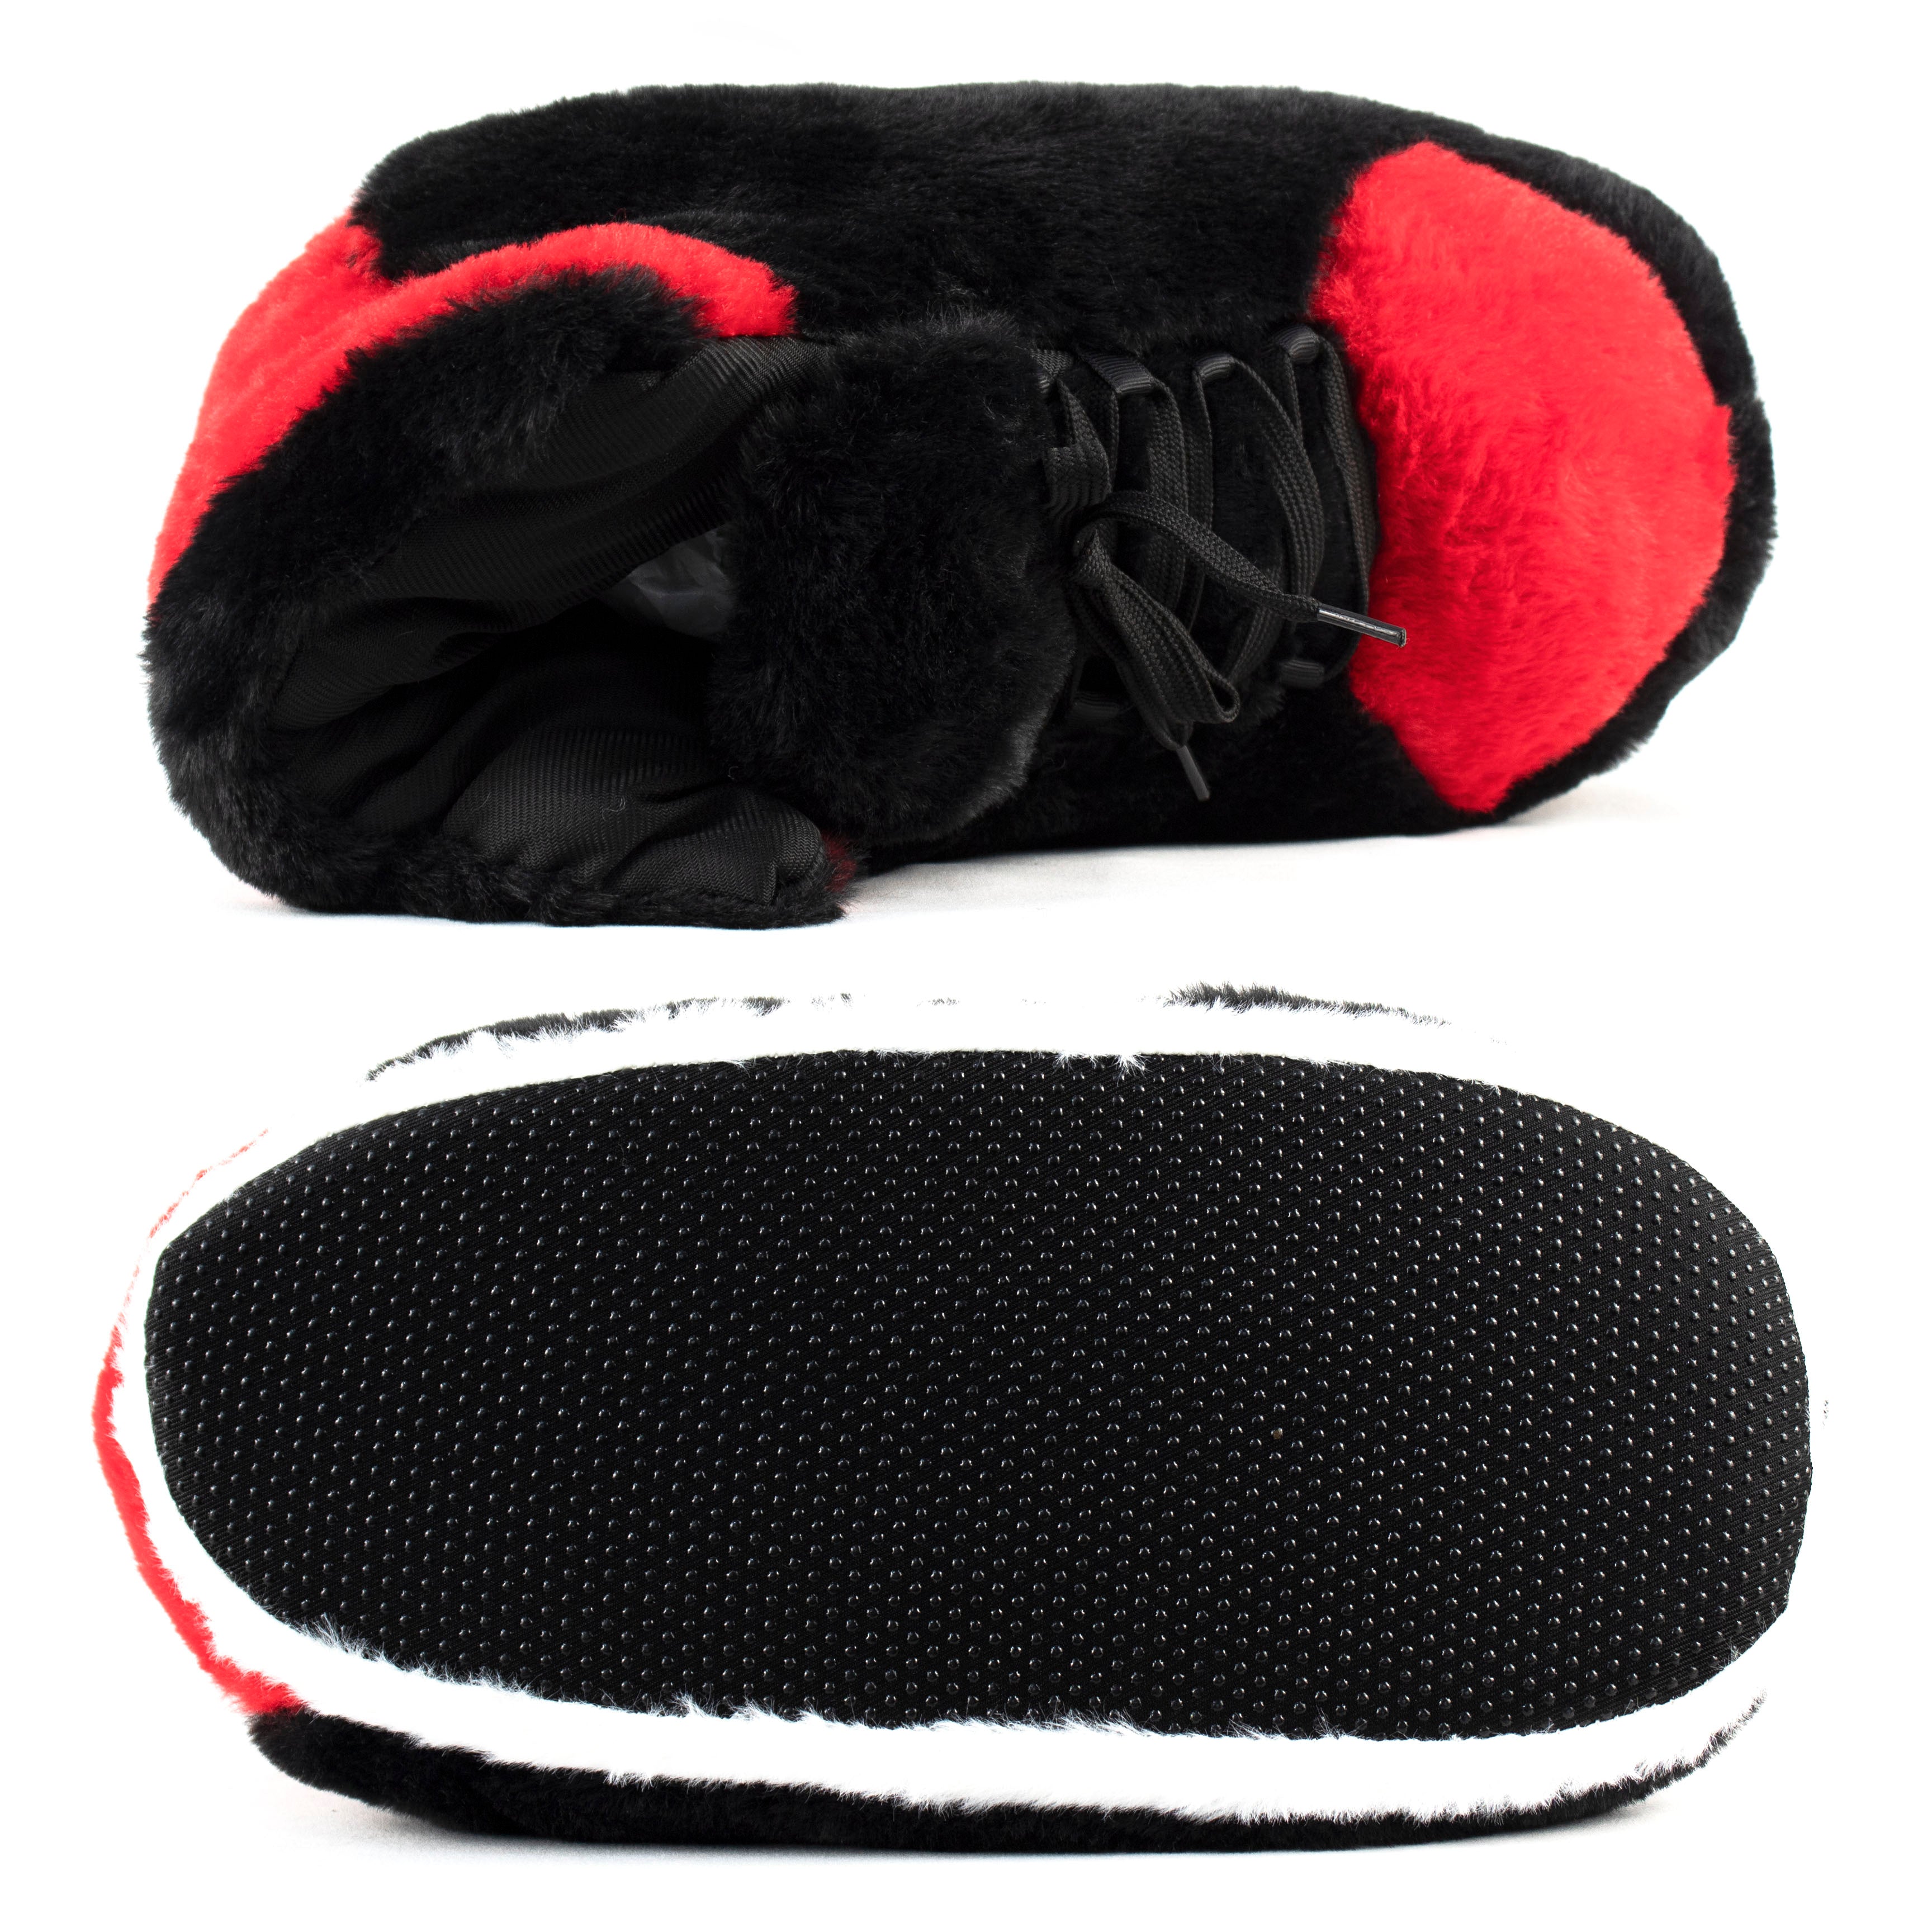 Details 134+ sneaker style slippers latest